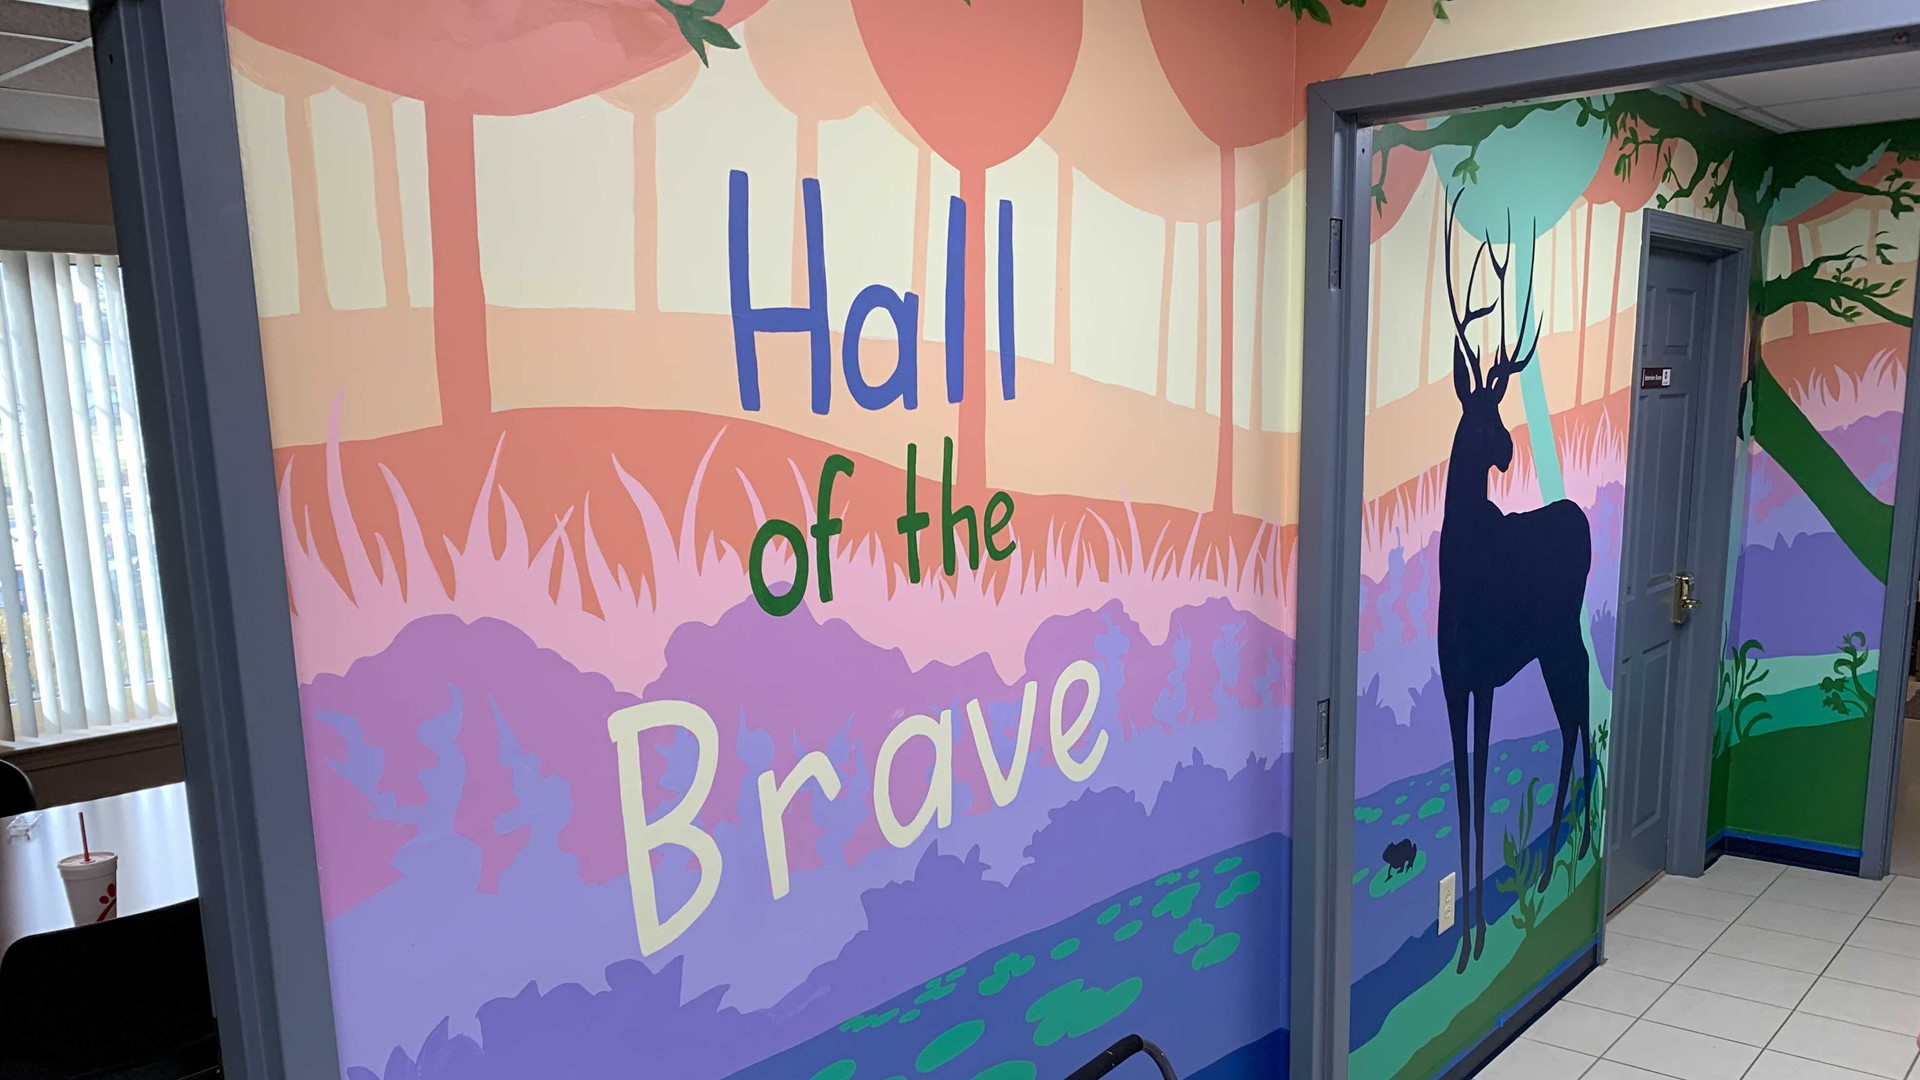 About a dozen people worked on the "Hall of the Brave." They started painting in early December and finished the mural just before Christmas.